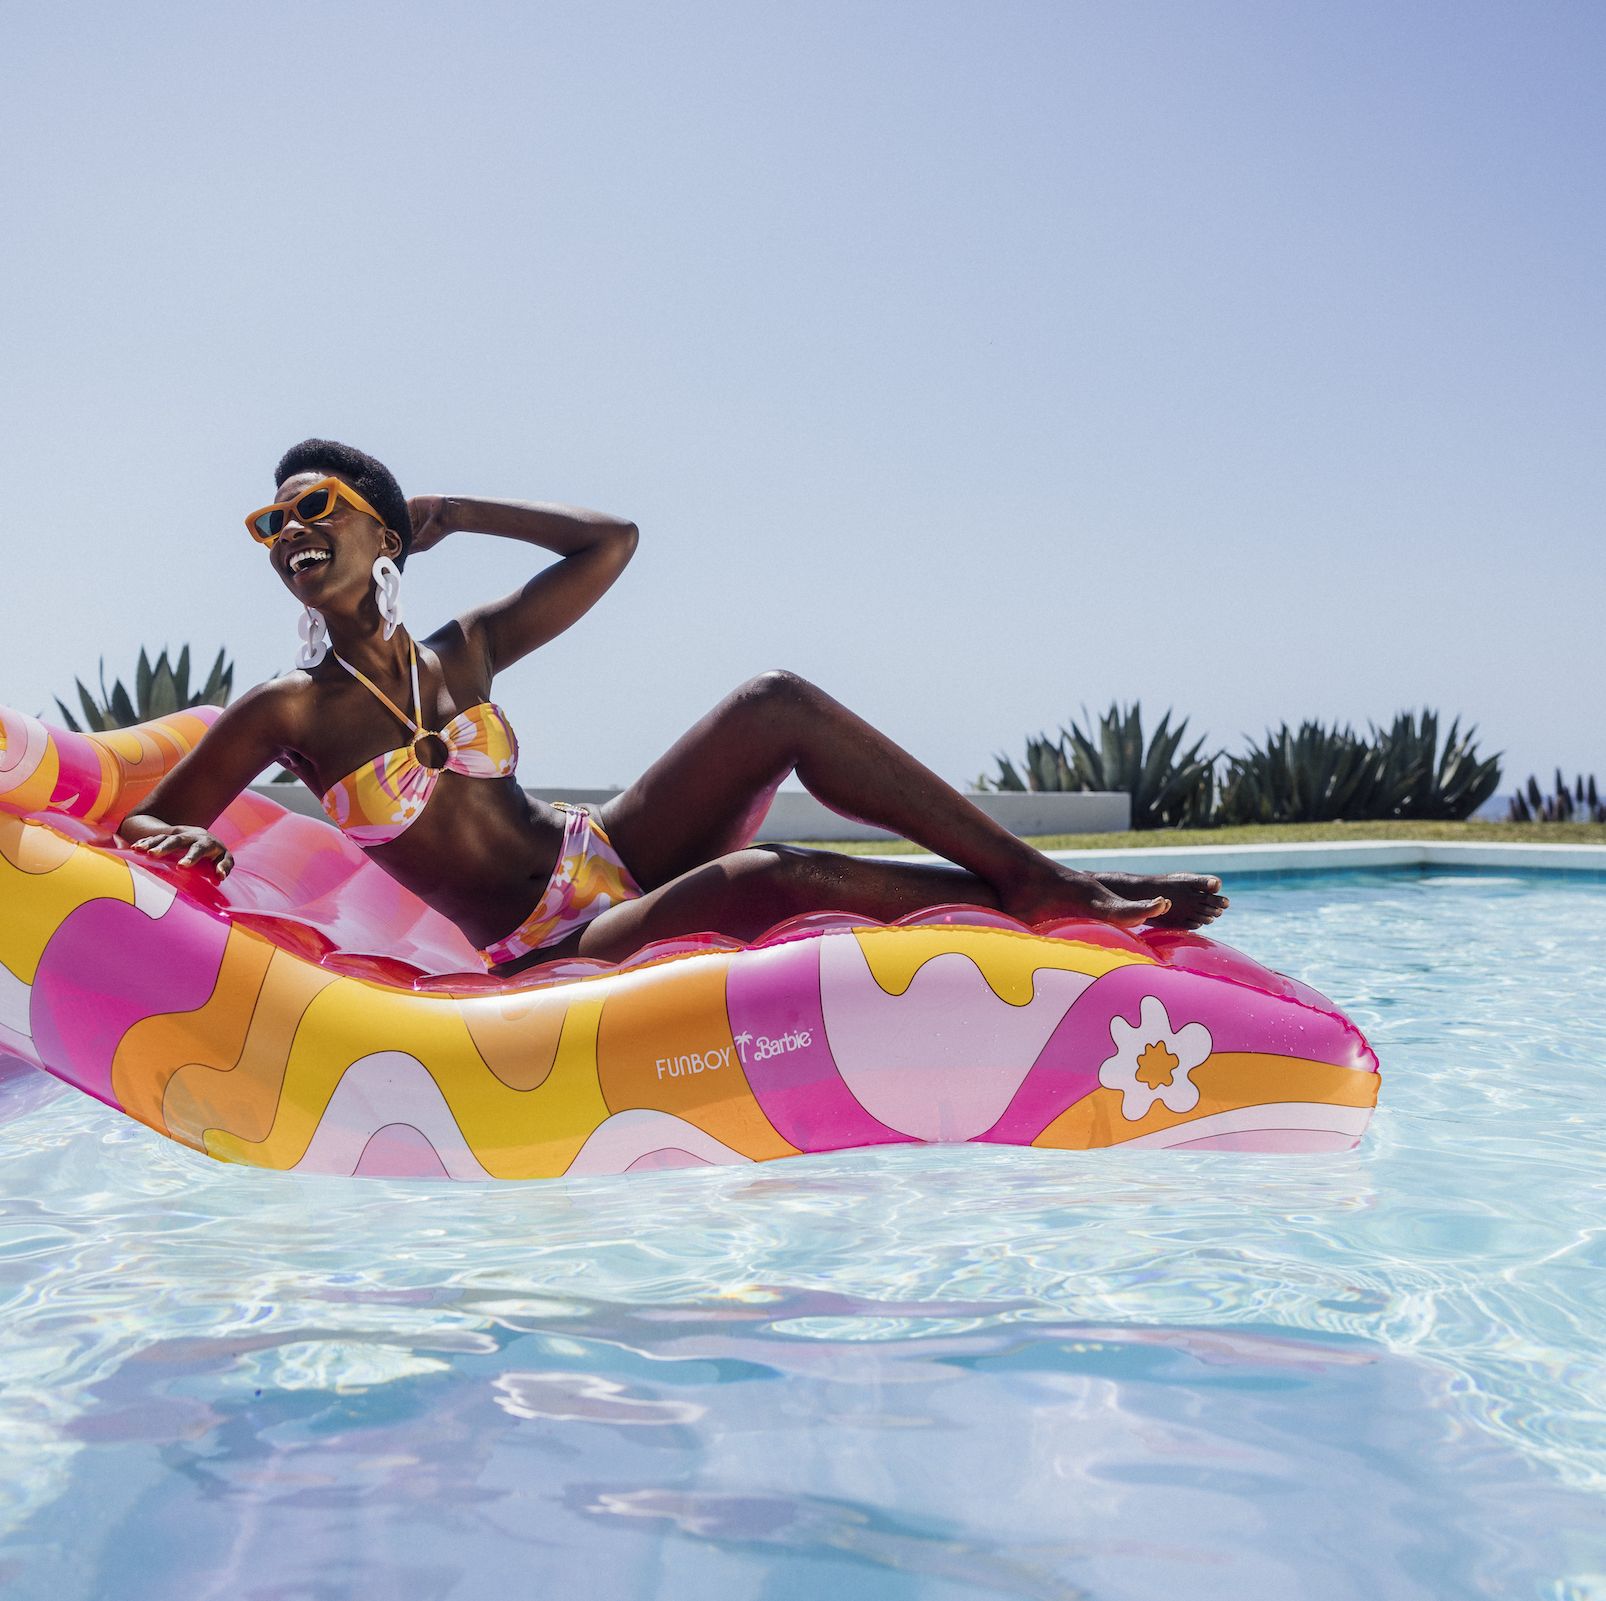 Attn: This Barbie Swim Collection Is Your Childhood Dream Come True